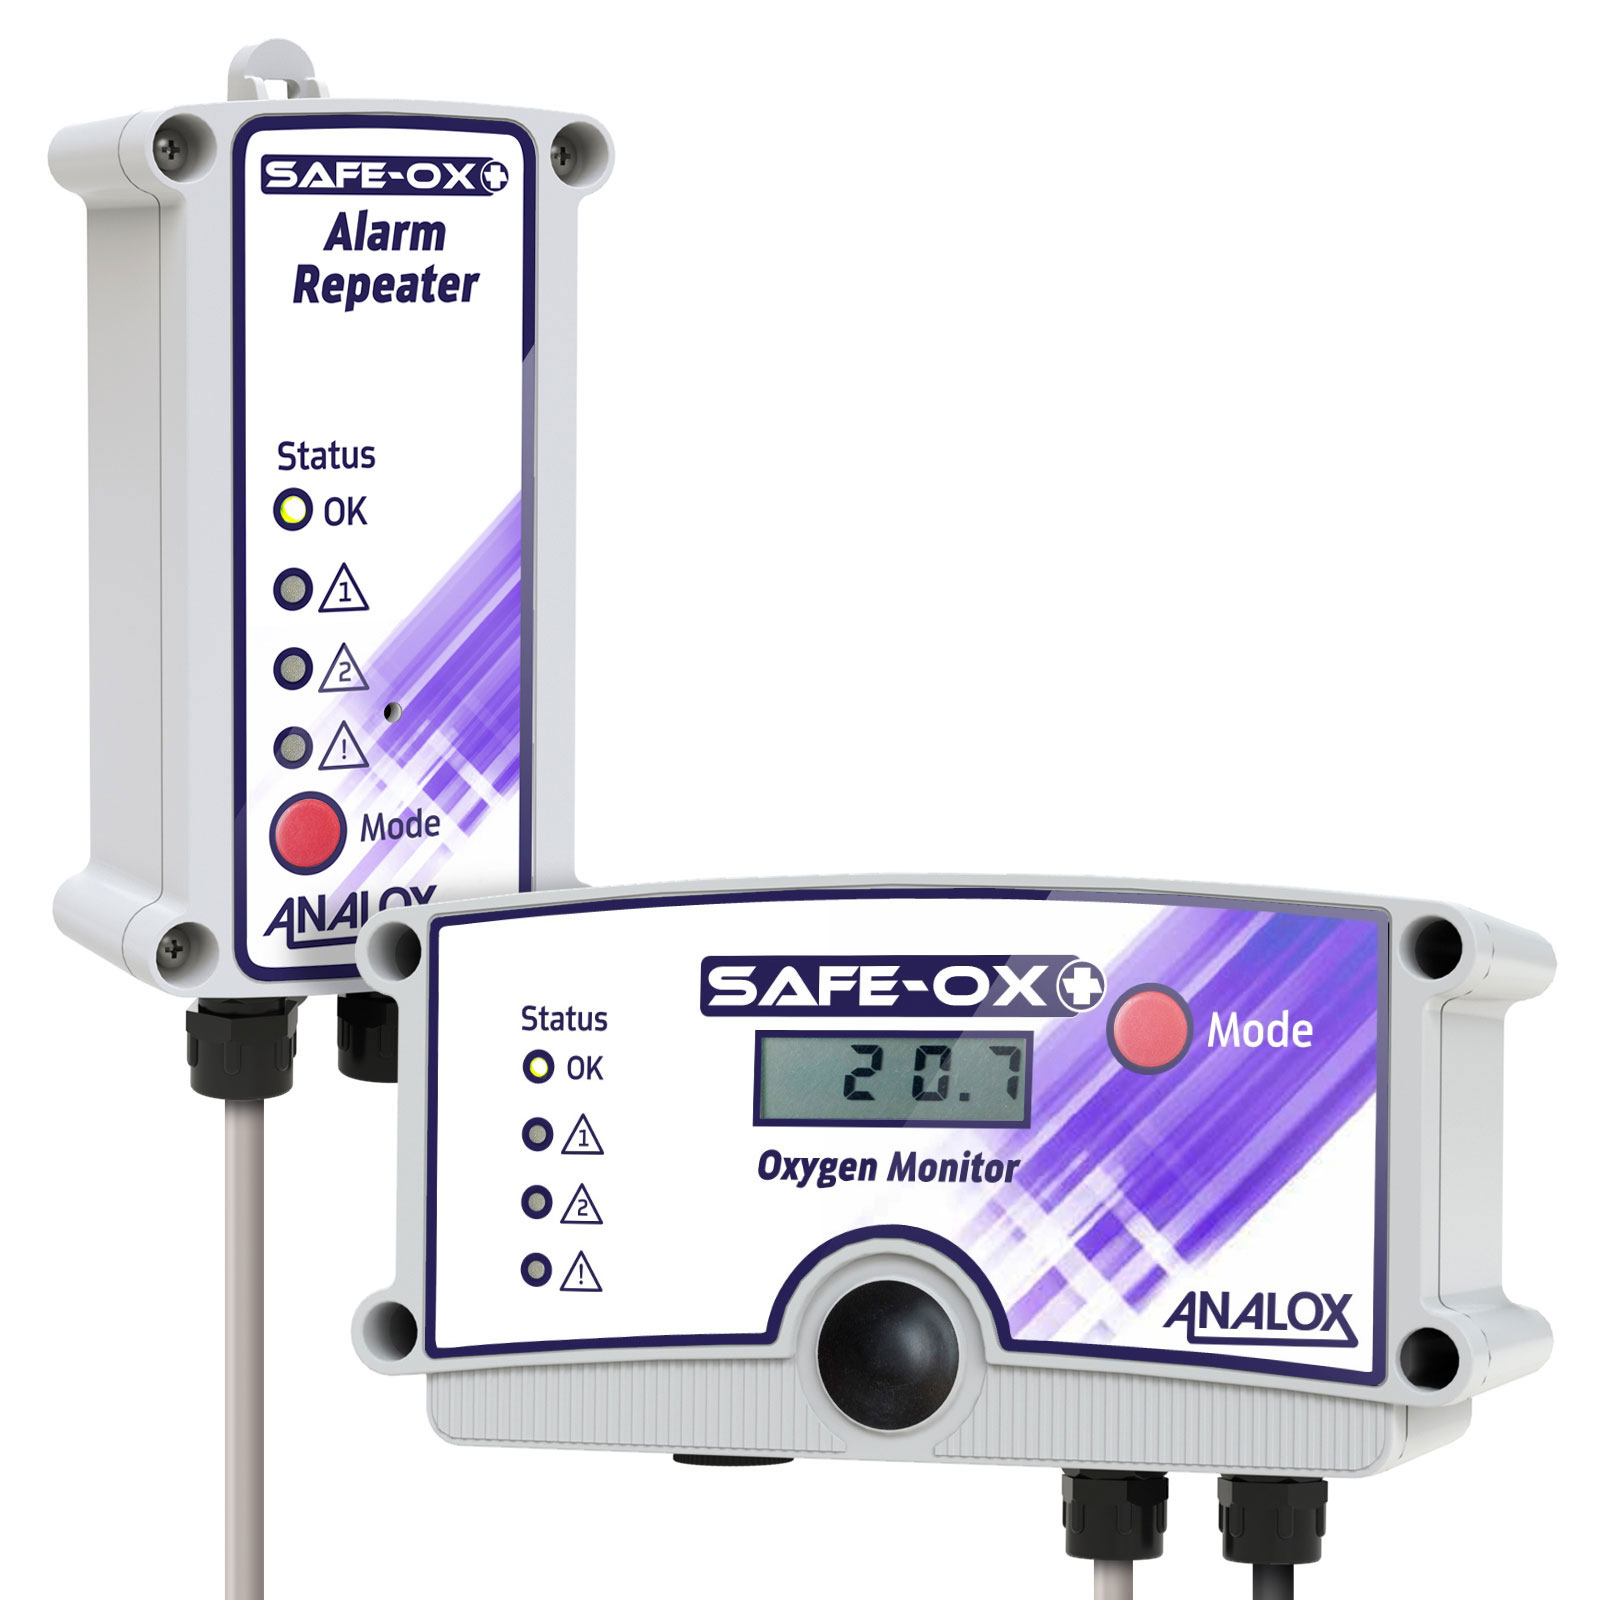 Analox Oxygen Alarm Repeater and Oxygen Monitor